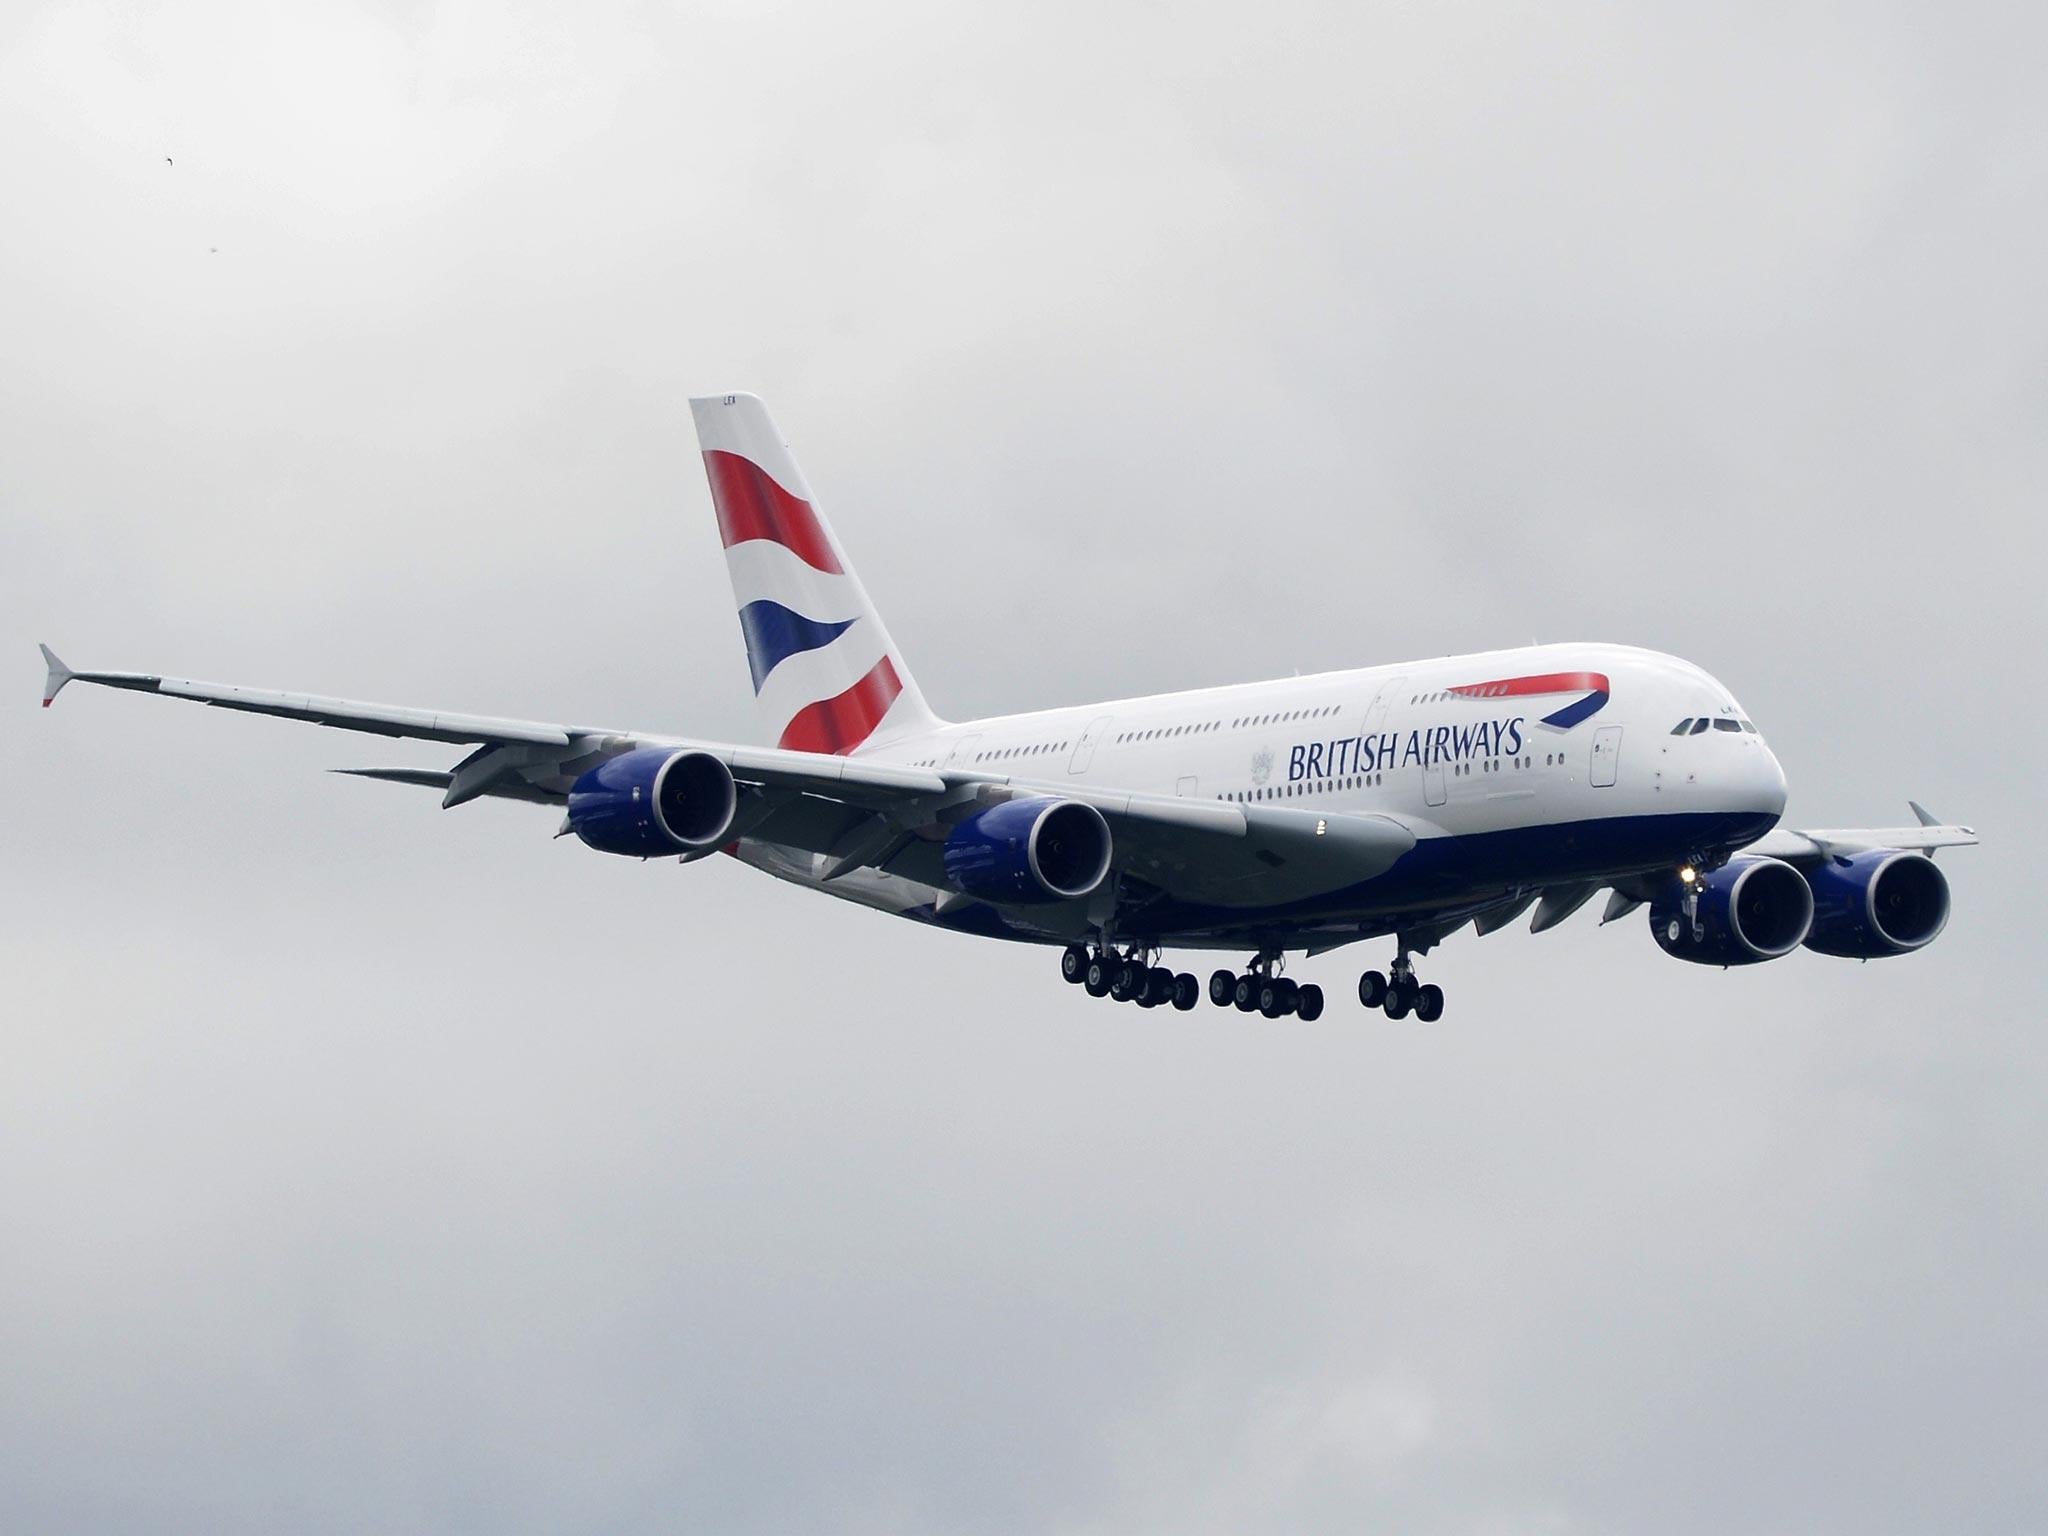 The flight was recalled following what BA said was a ‘minor technical fault’